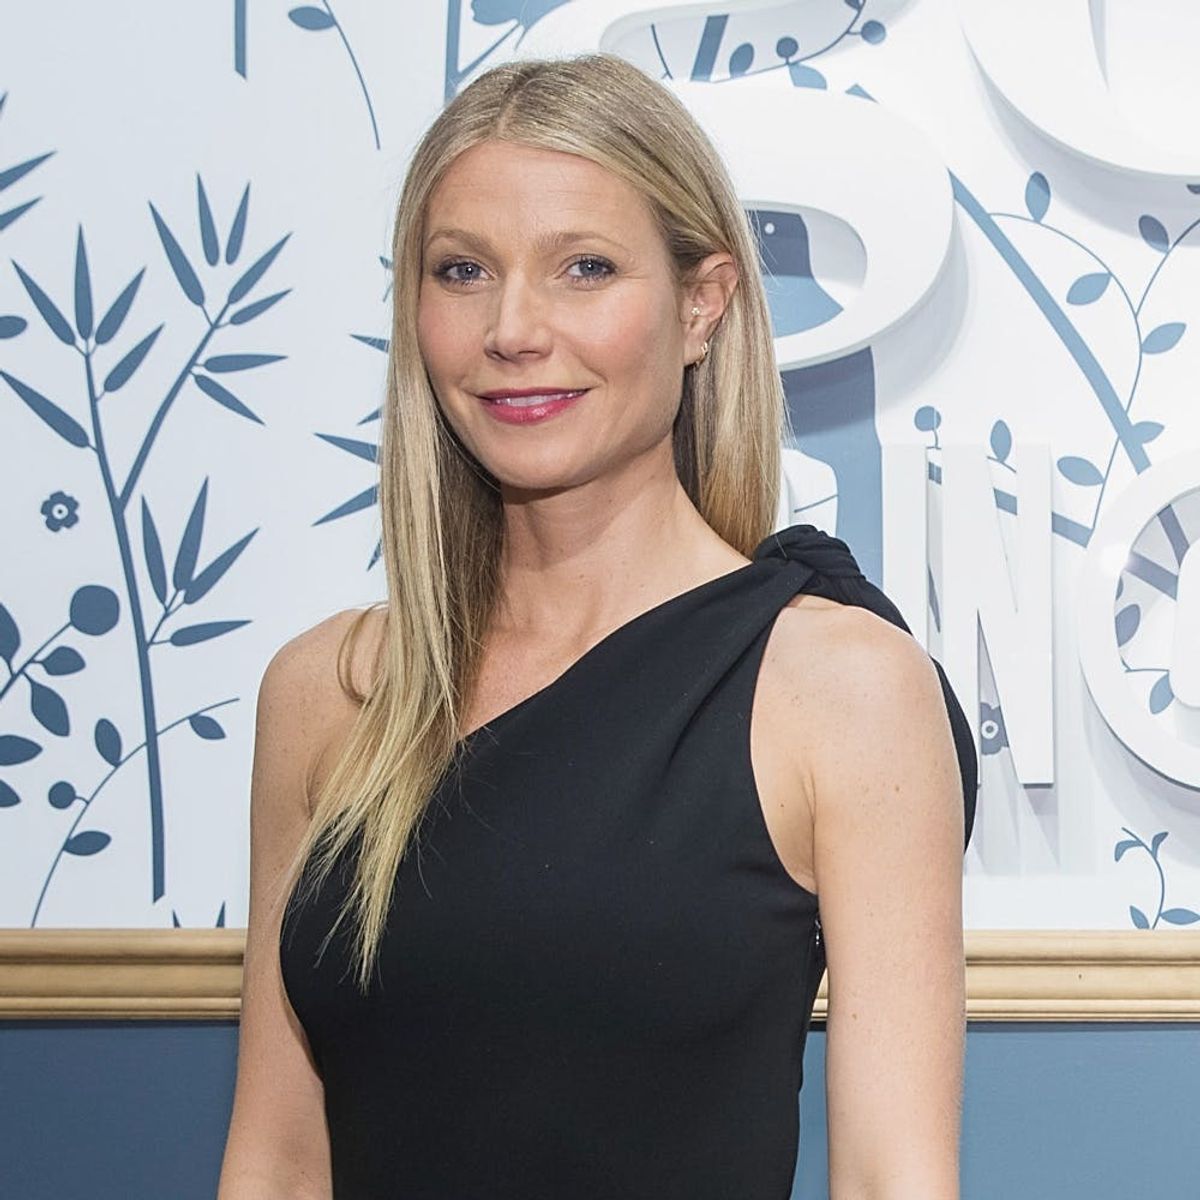 Gwyneth Paltrow Has Something Shocking (Yet Weirdly Relatable) to Say About Goop